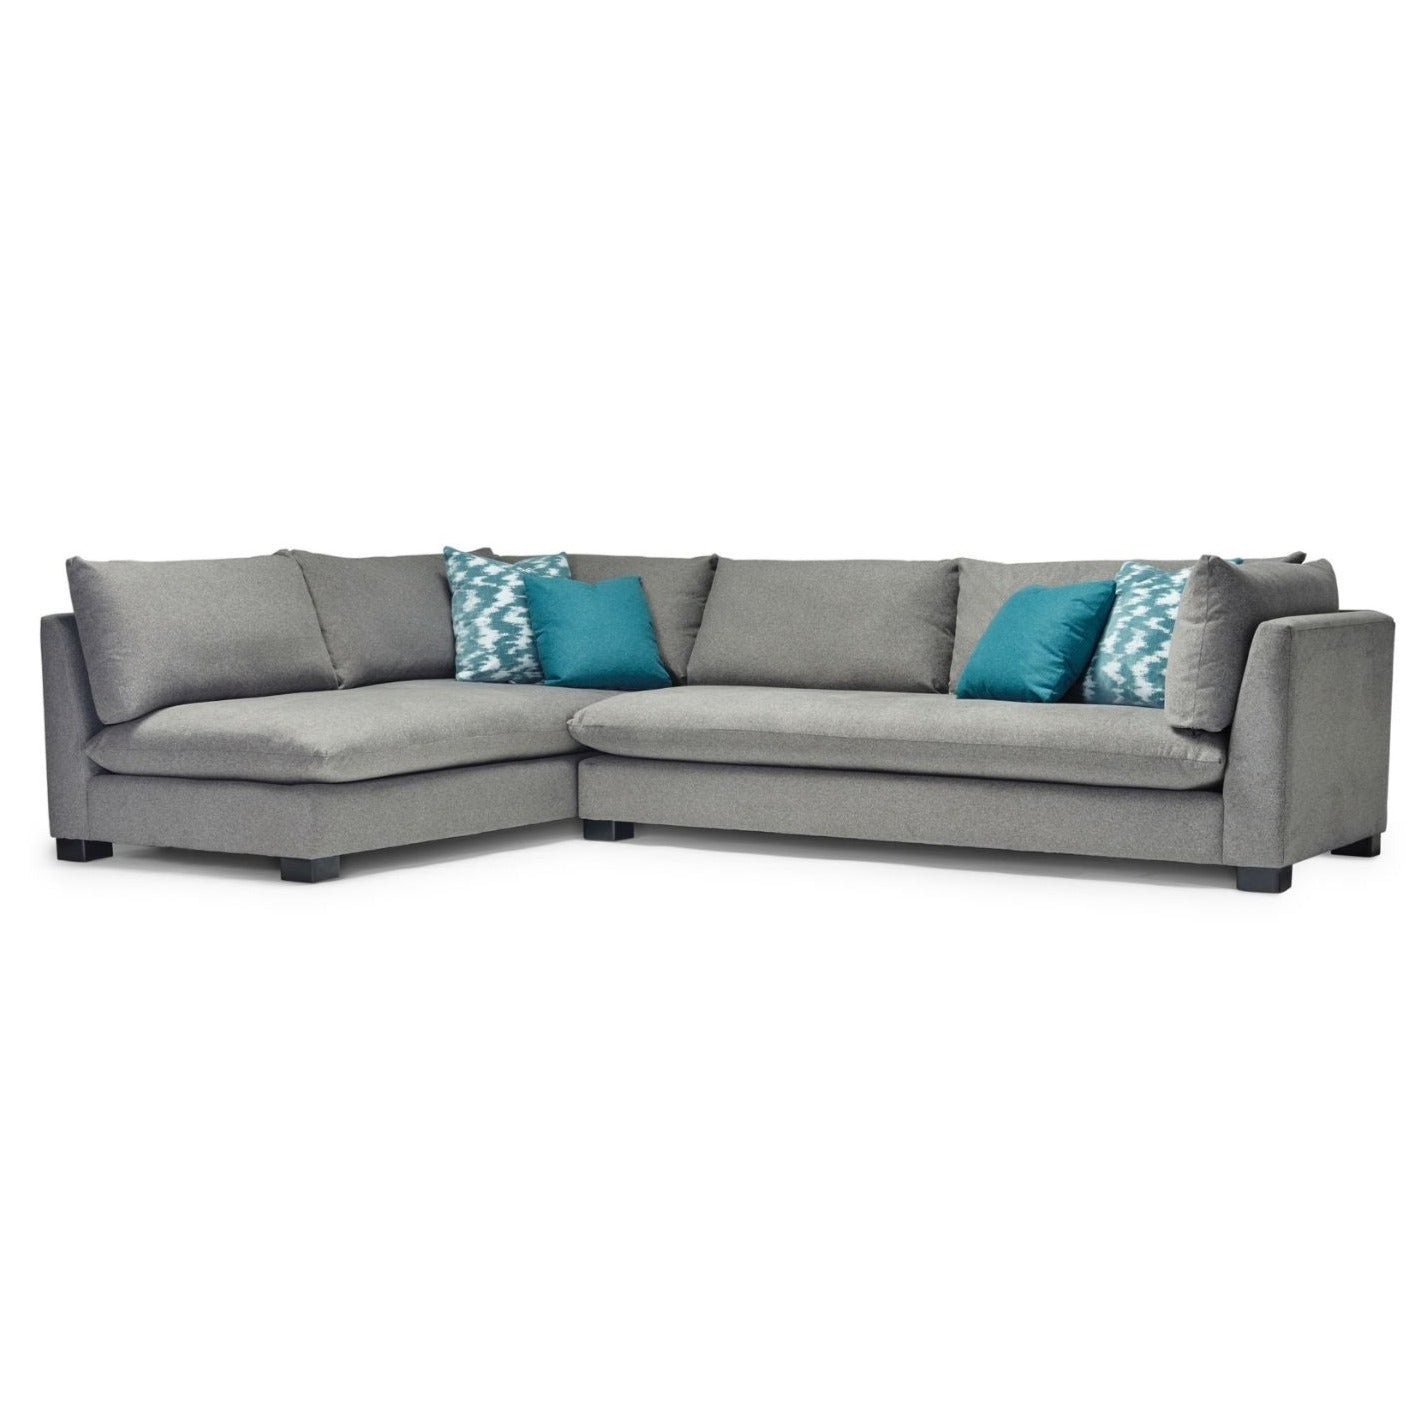 Sofa or Sectional Favorite